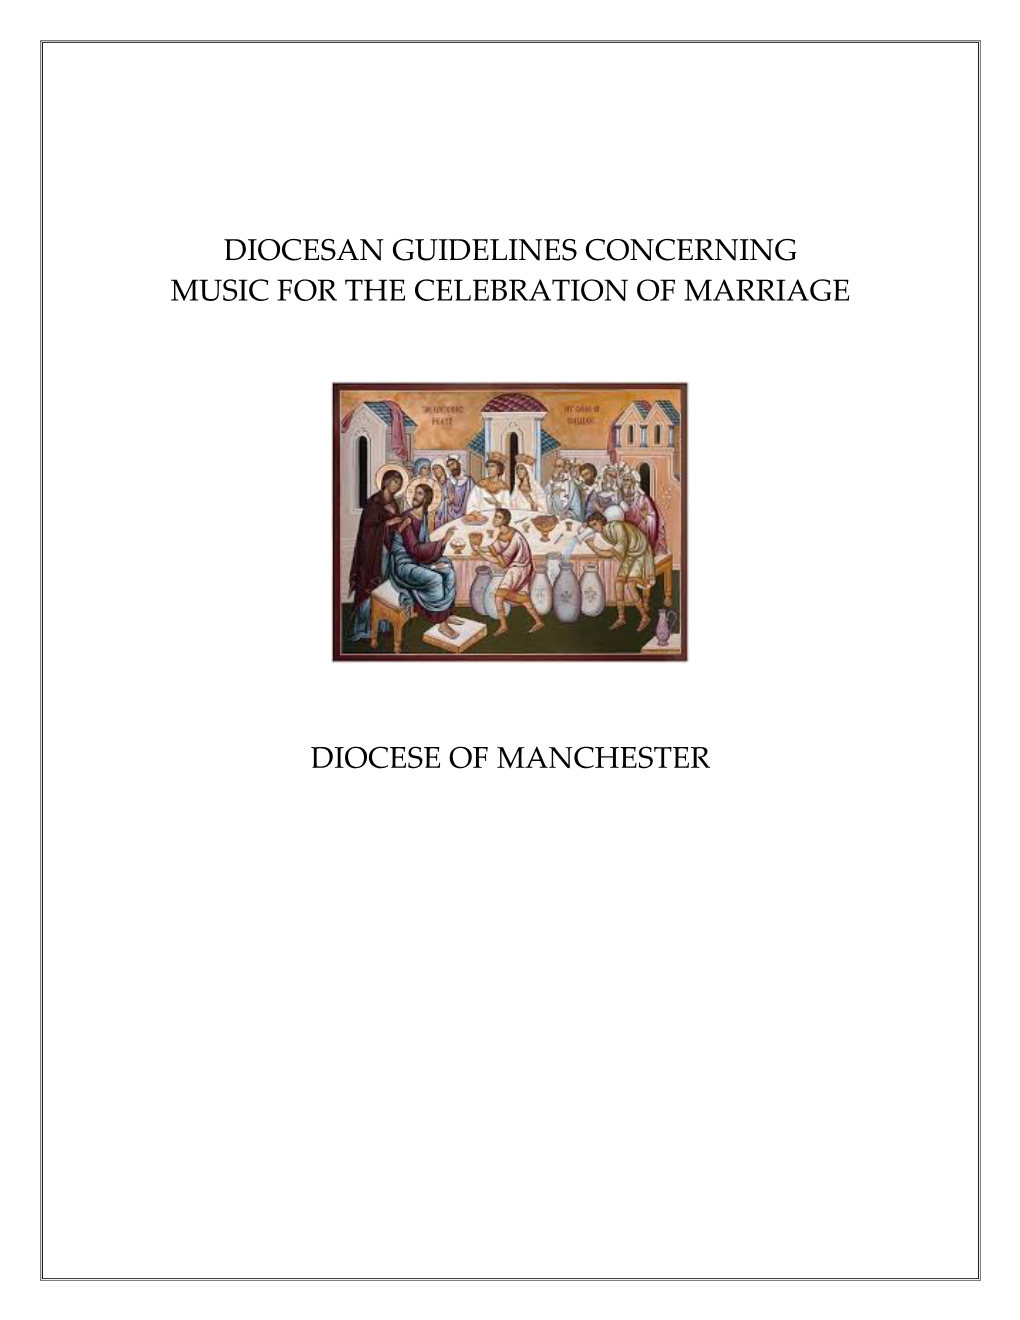 Diocesan Guidelines Concerning Music for the Celebration of Marriage